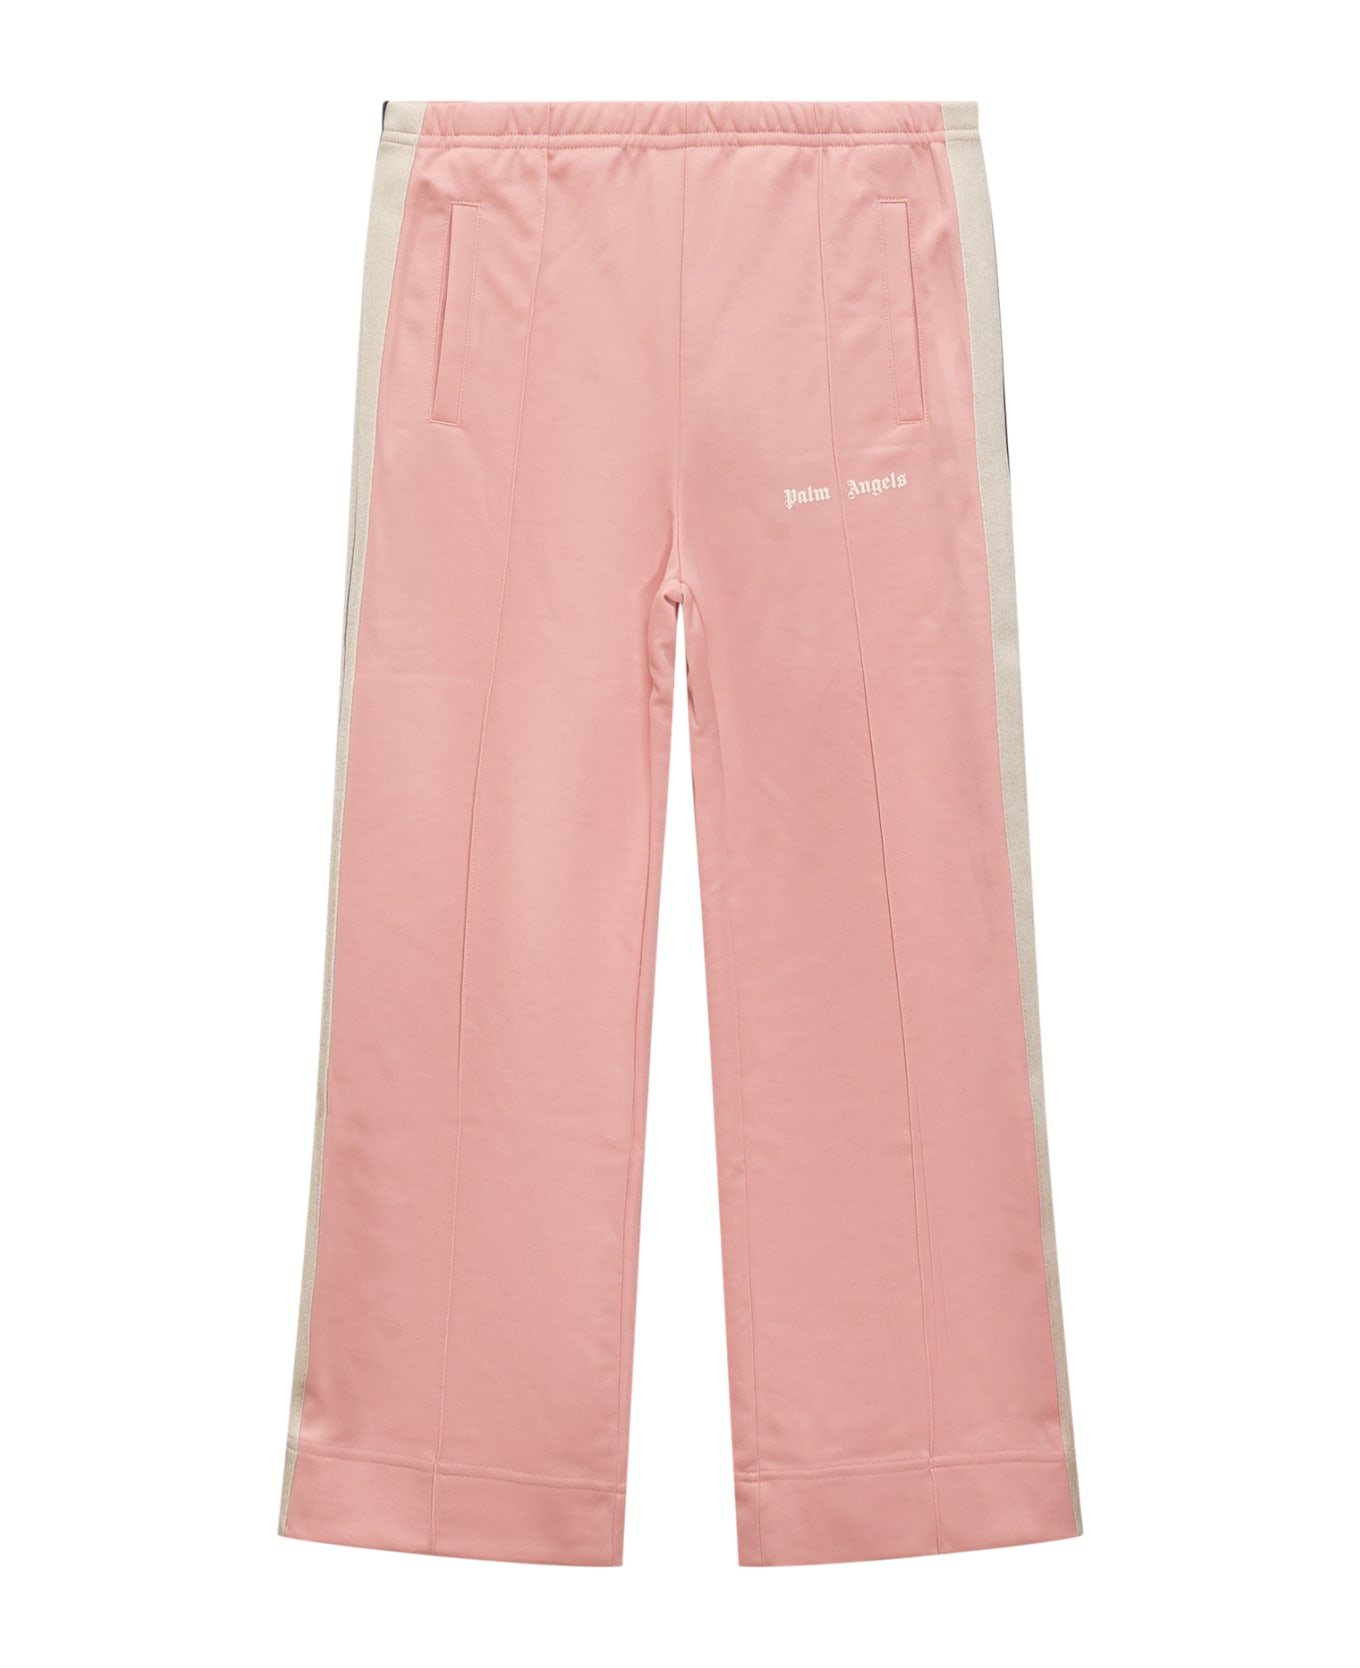 Palm Angels Logo Pants - PINK OFF WHITE ボトムス